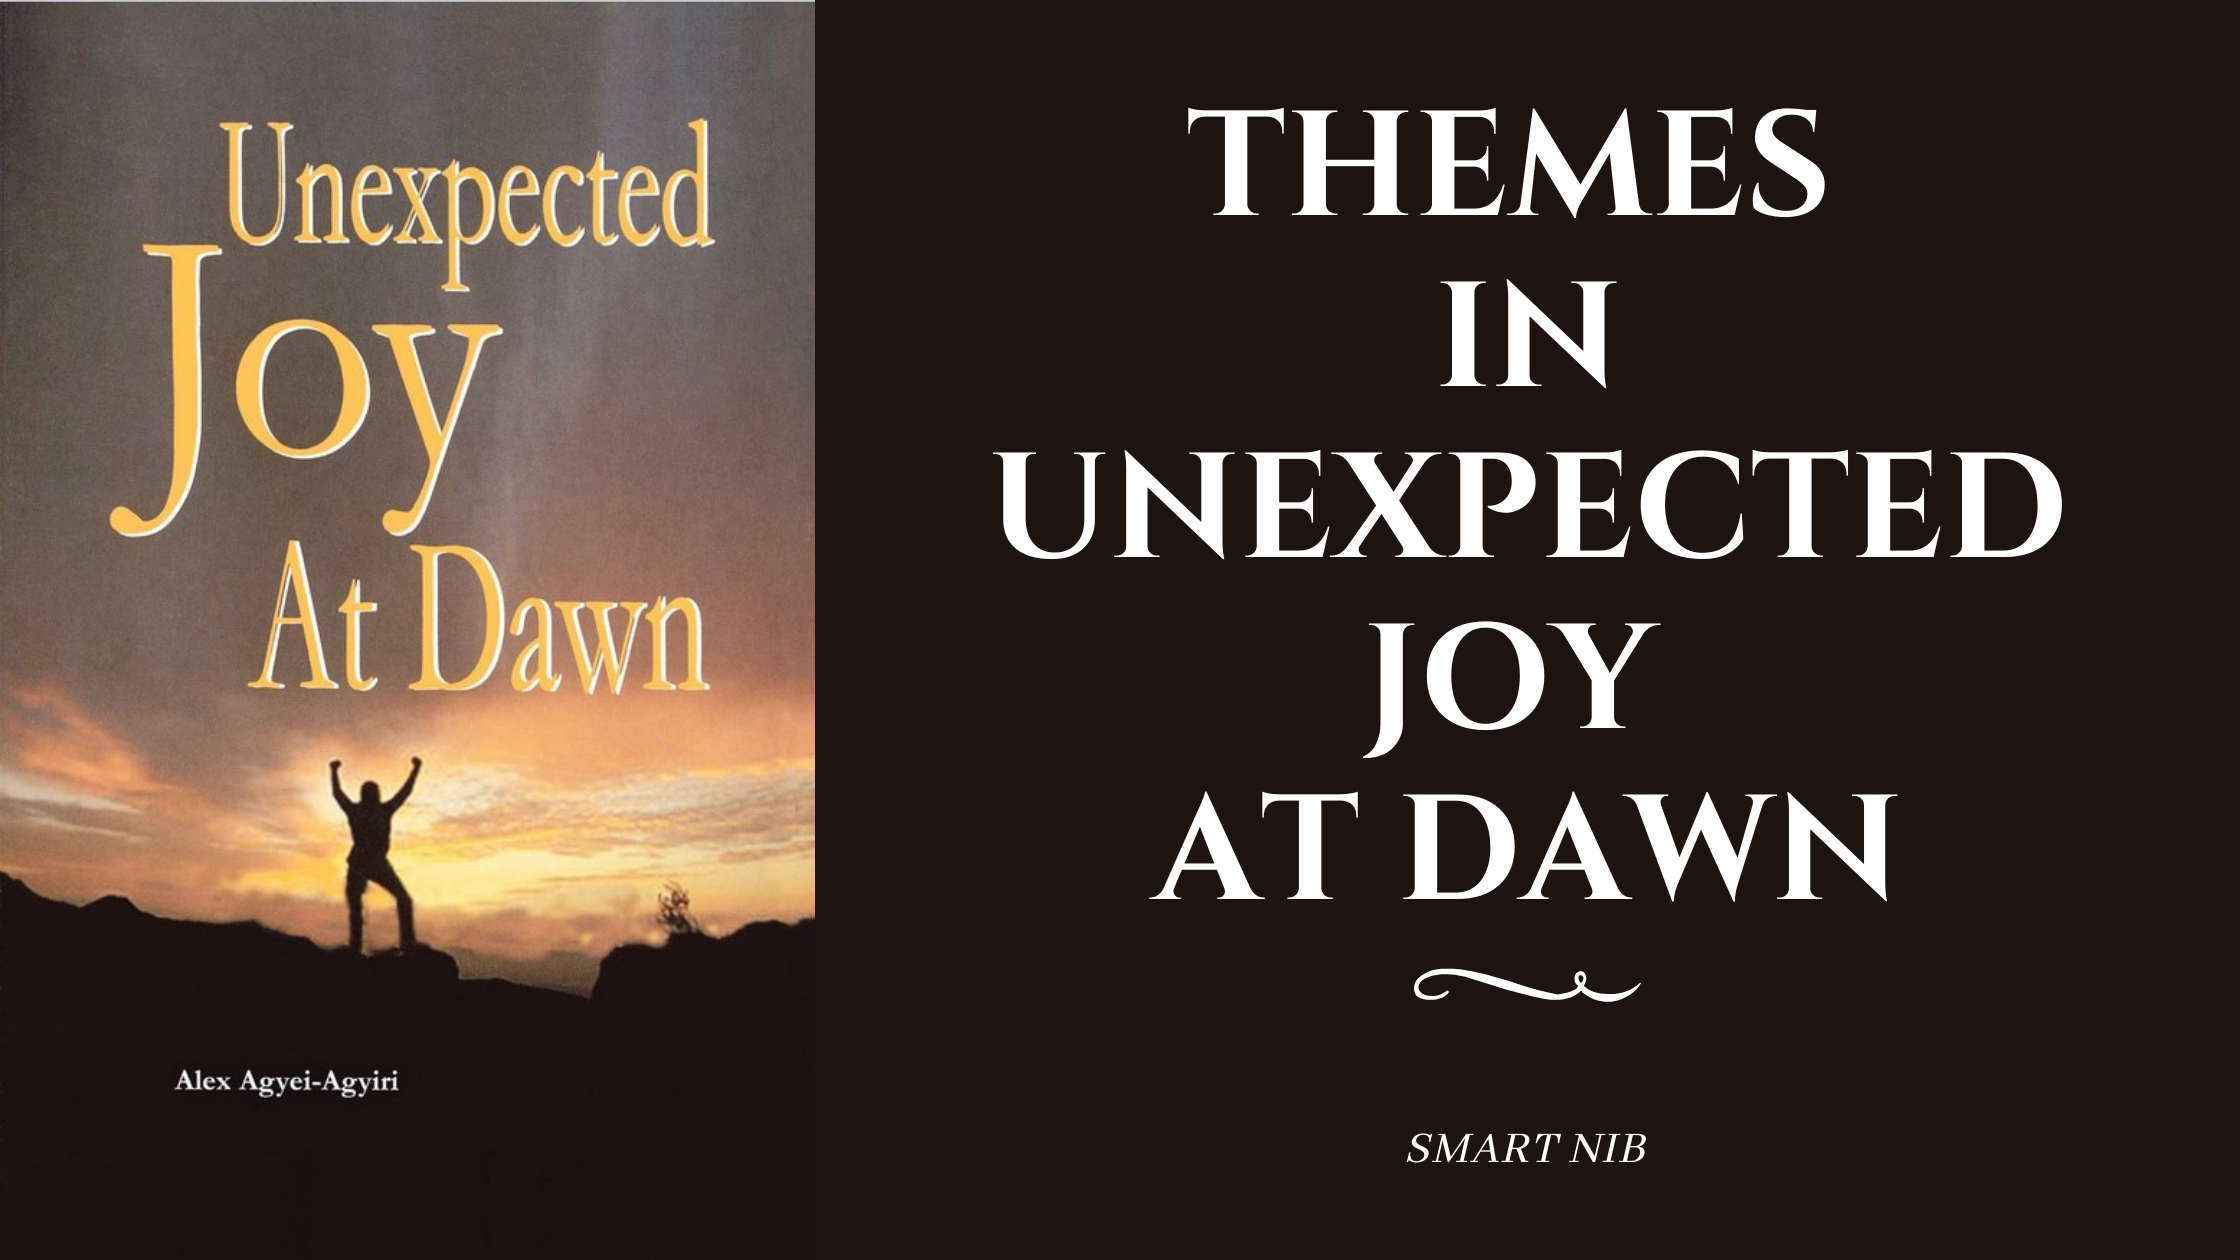 The Themes in Unexpected Joy At Dawn